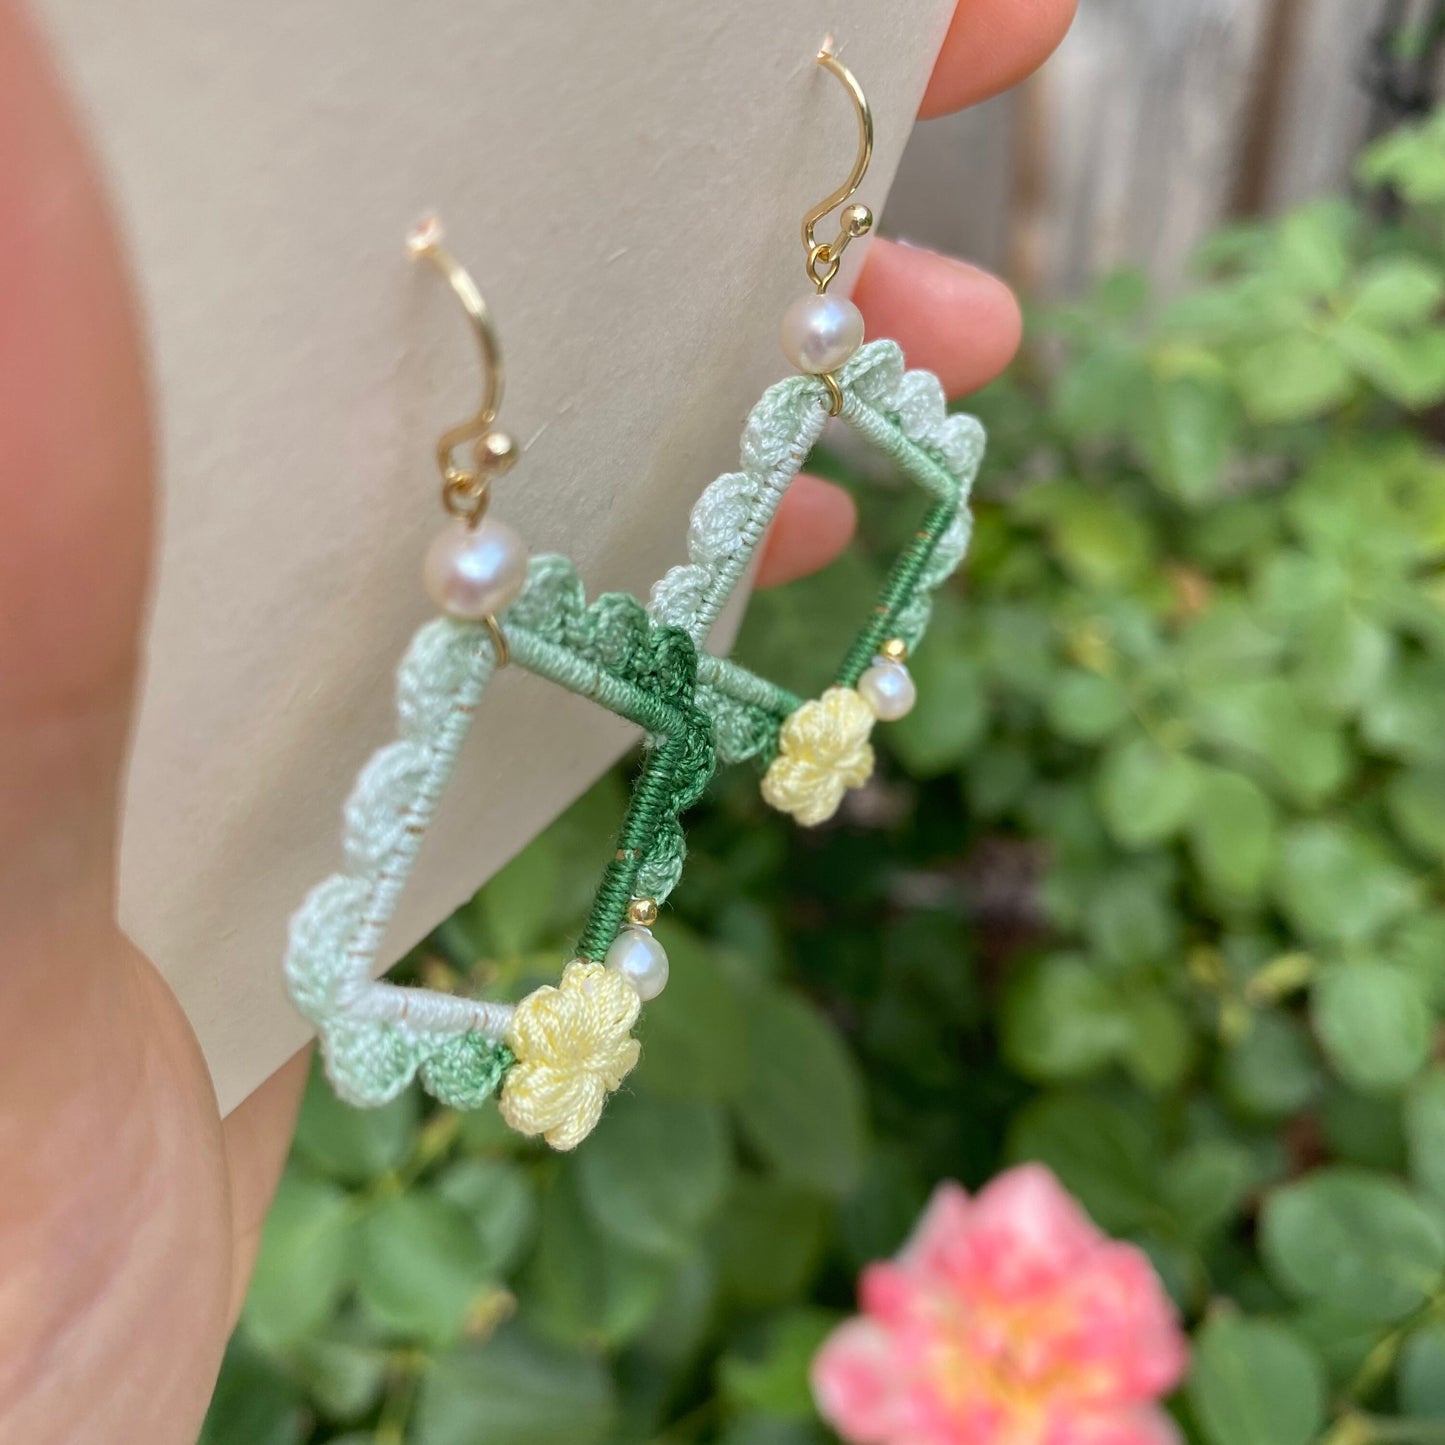 Ombre Green yellow flower crochet earrings in square shape/Microcrochet /dangle geometry jewelry with pearls/gift for her/minimalist/